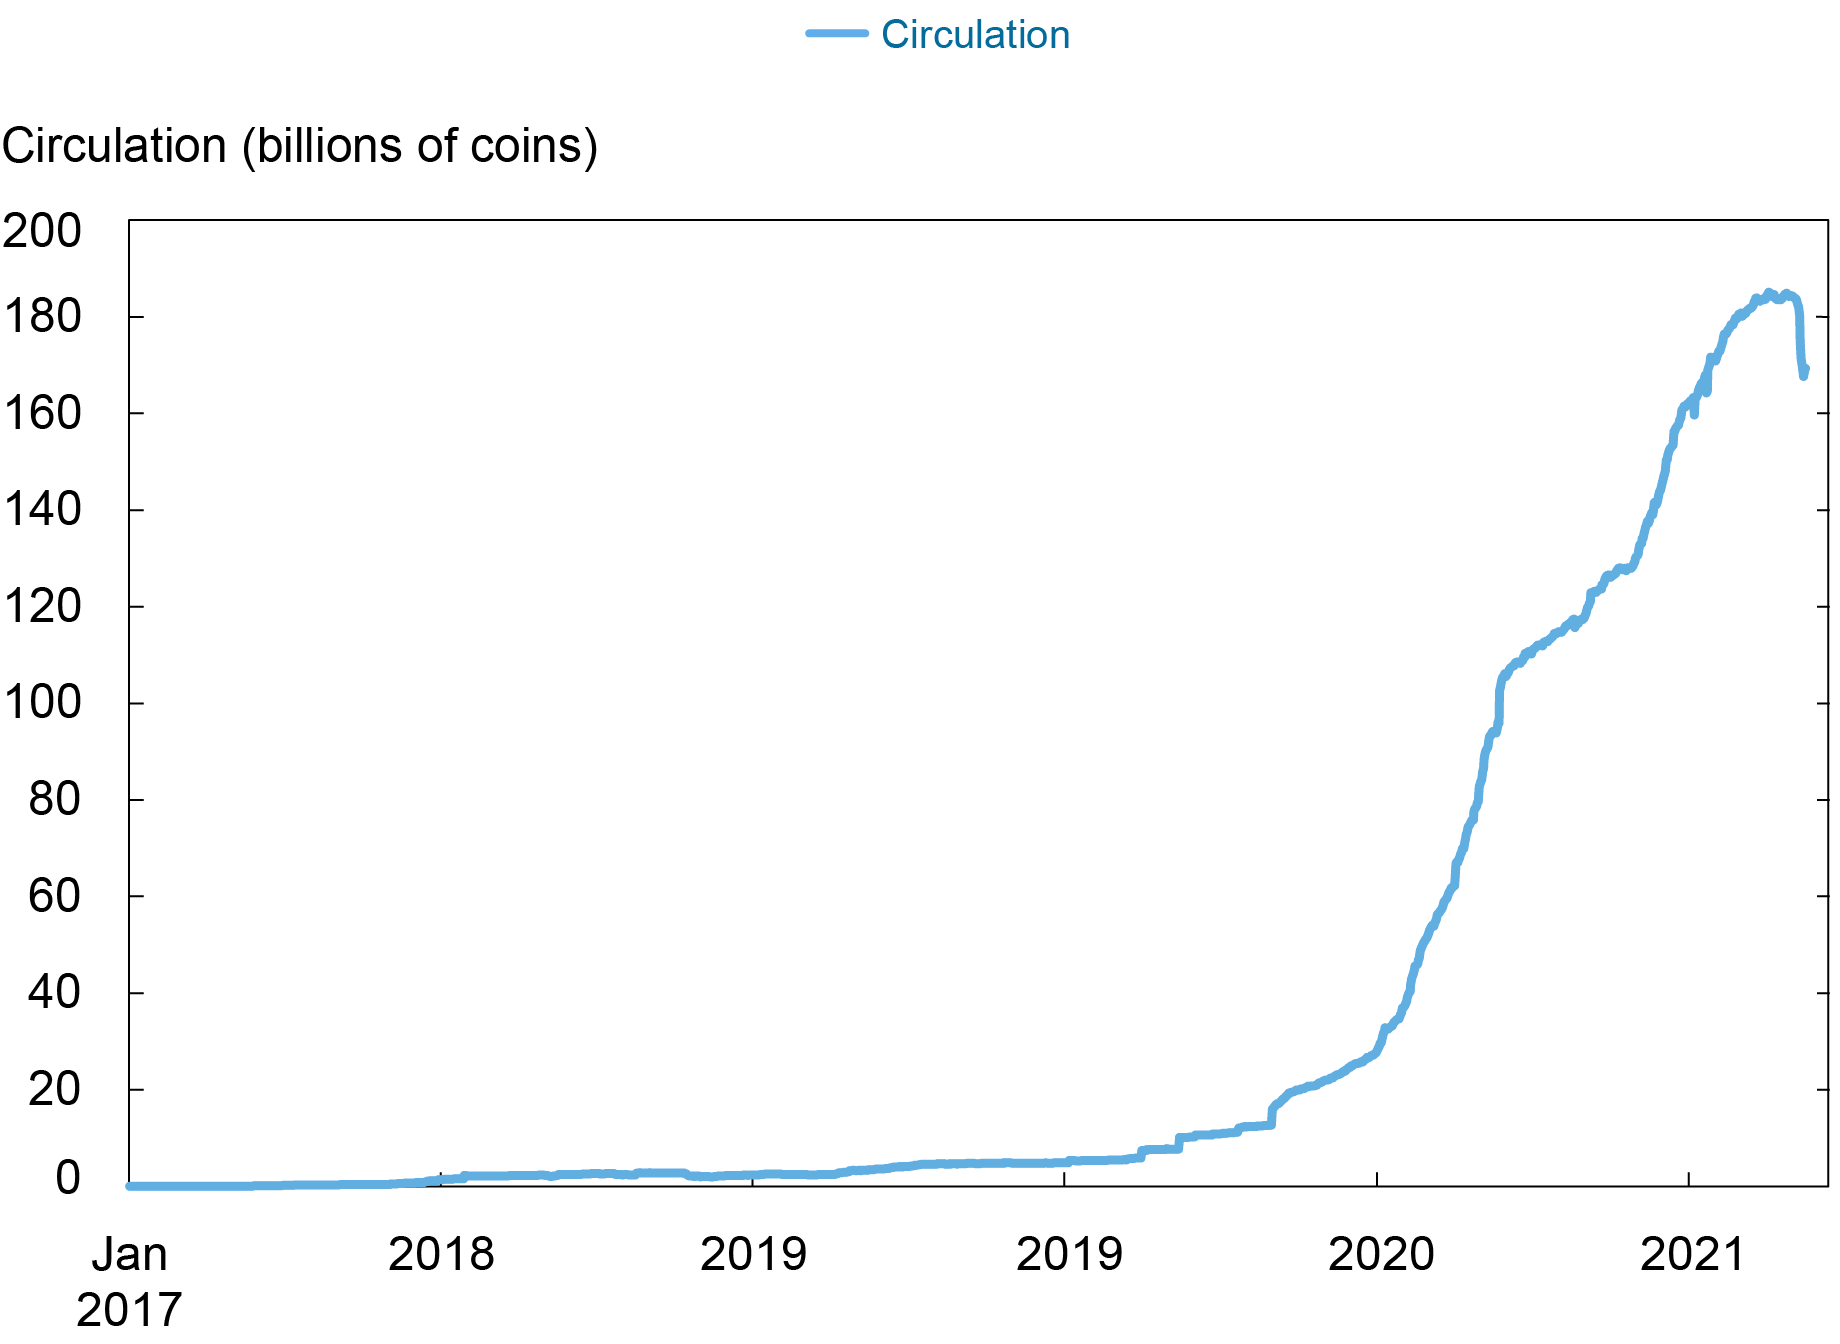 Liberty Street Economics chart showing the circulation of stablecoins (in billions of coins) from January 2017 to May 2022. Stablecoin circulation has been increasing since 2019 but dropped sharply in May 2022. 